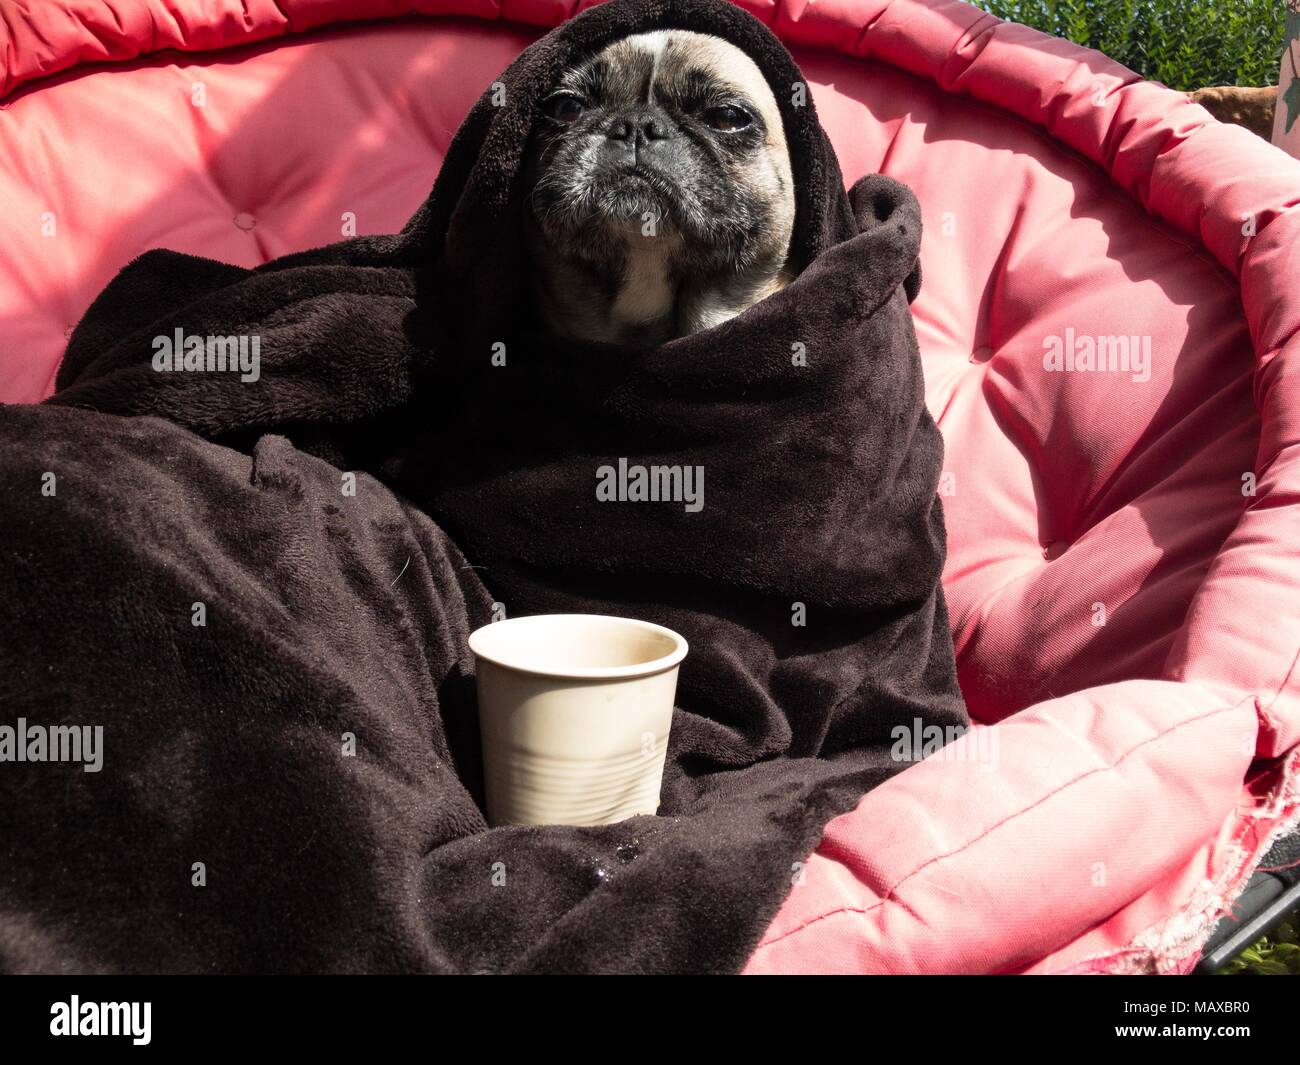 Dog (pug) sits wrapped in blanket and looks like a wise man Stock Photo